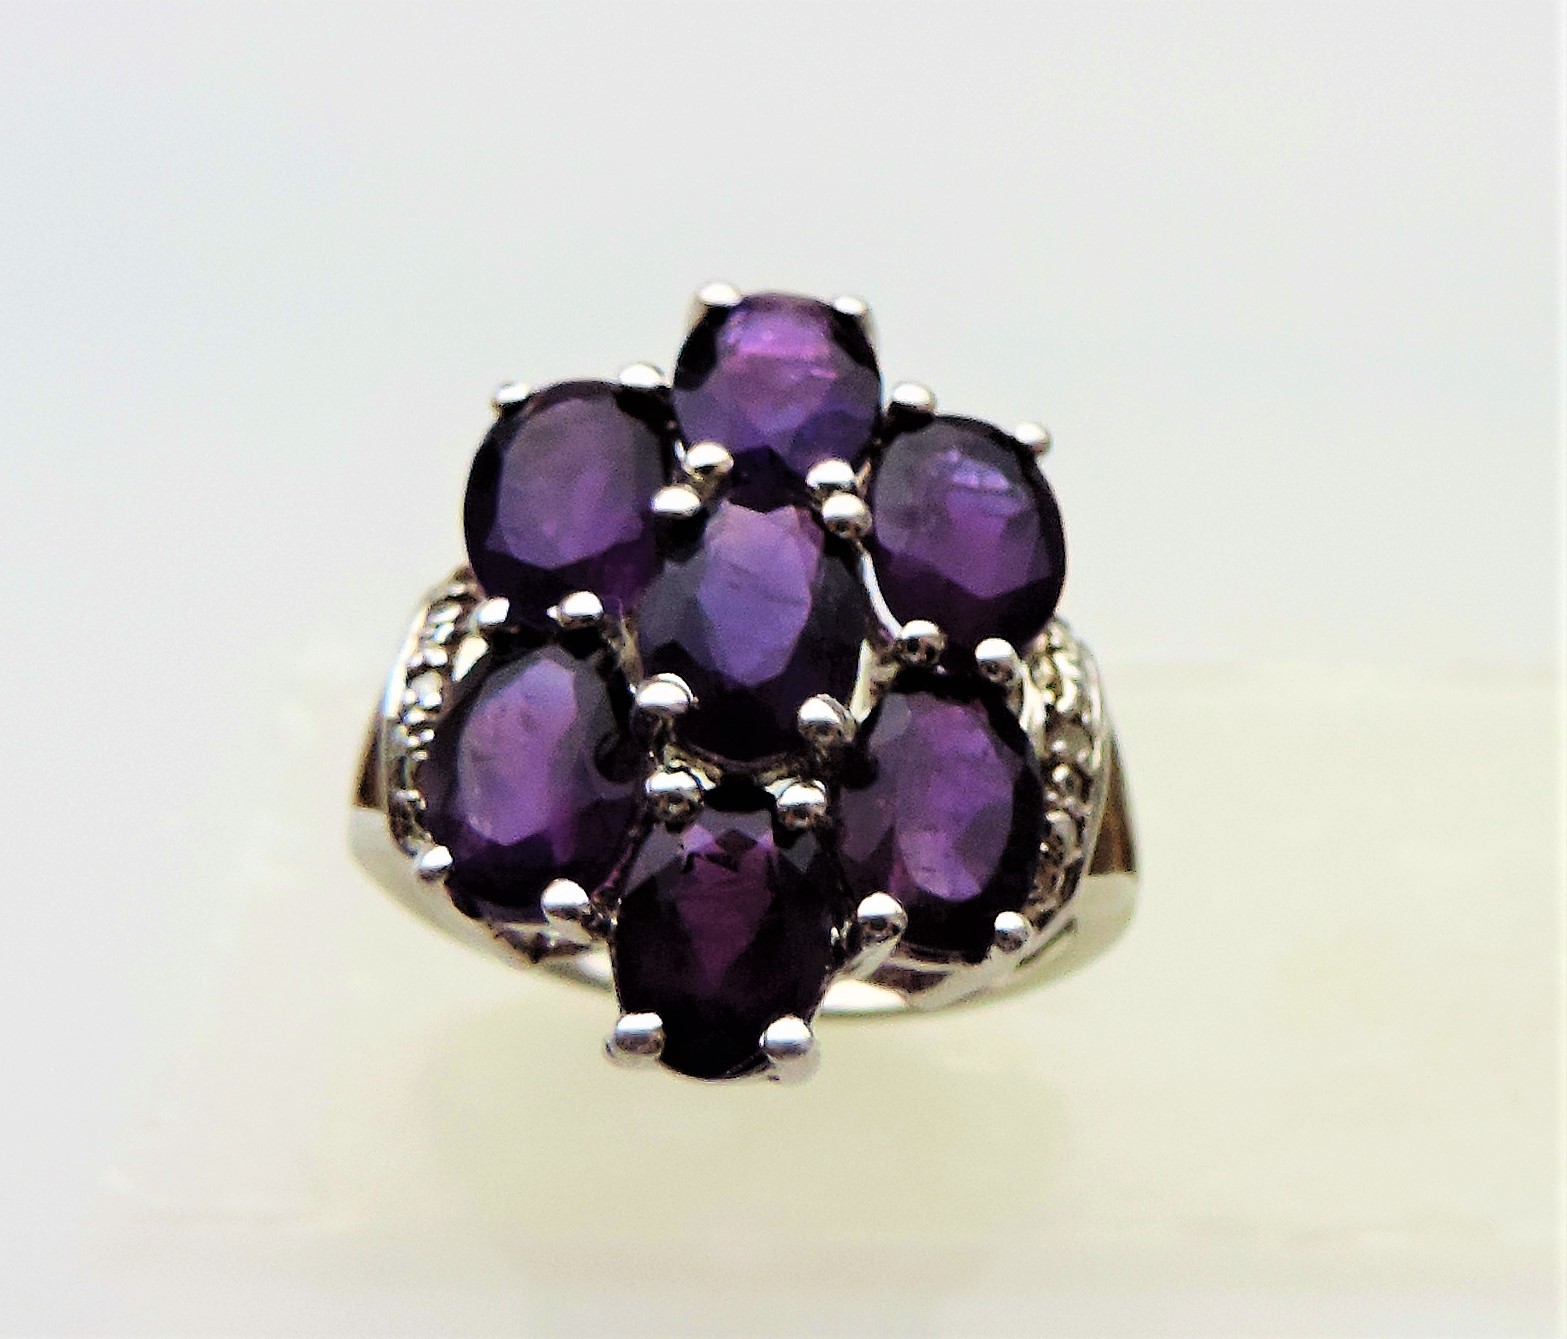 3.15 carat Amethyst Cluster Ring - Image 2 of 5